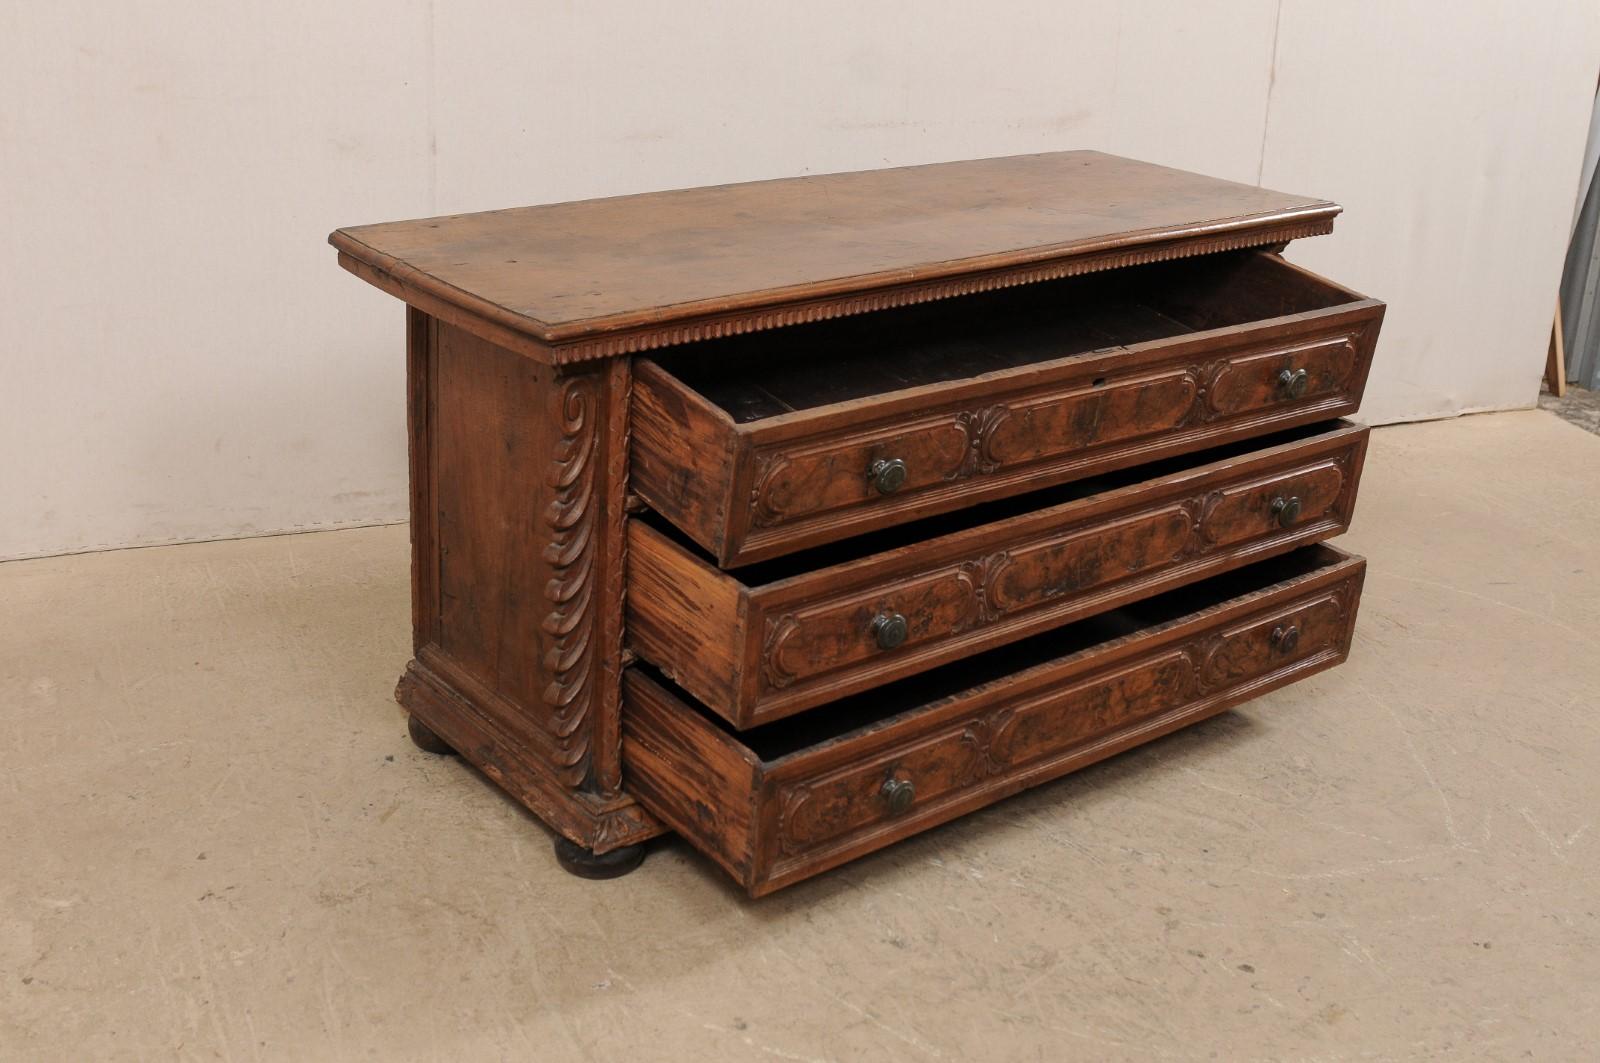 Fabulous Italian Early 18th C. Walnut Chest of Drawers Beautifully Carved 1